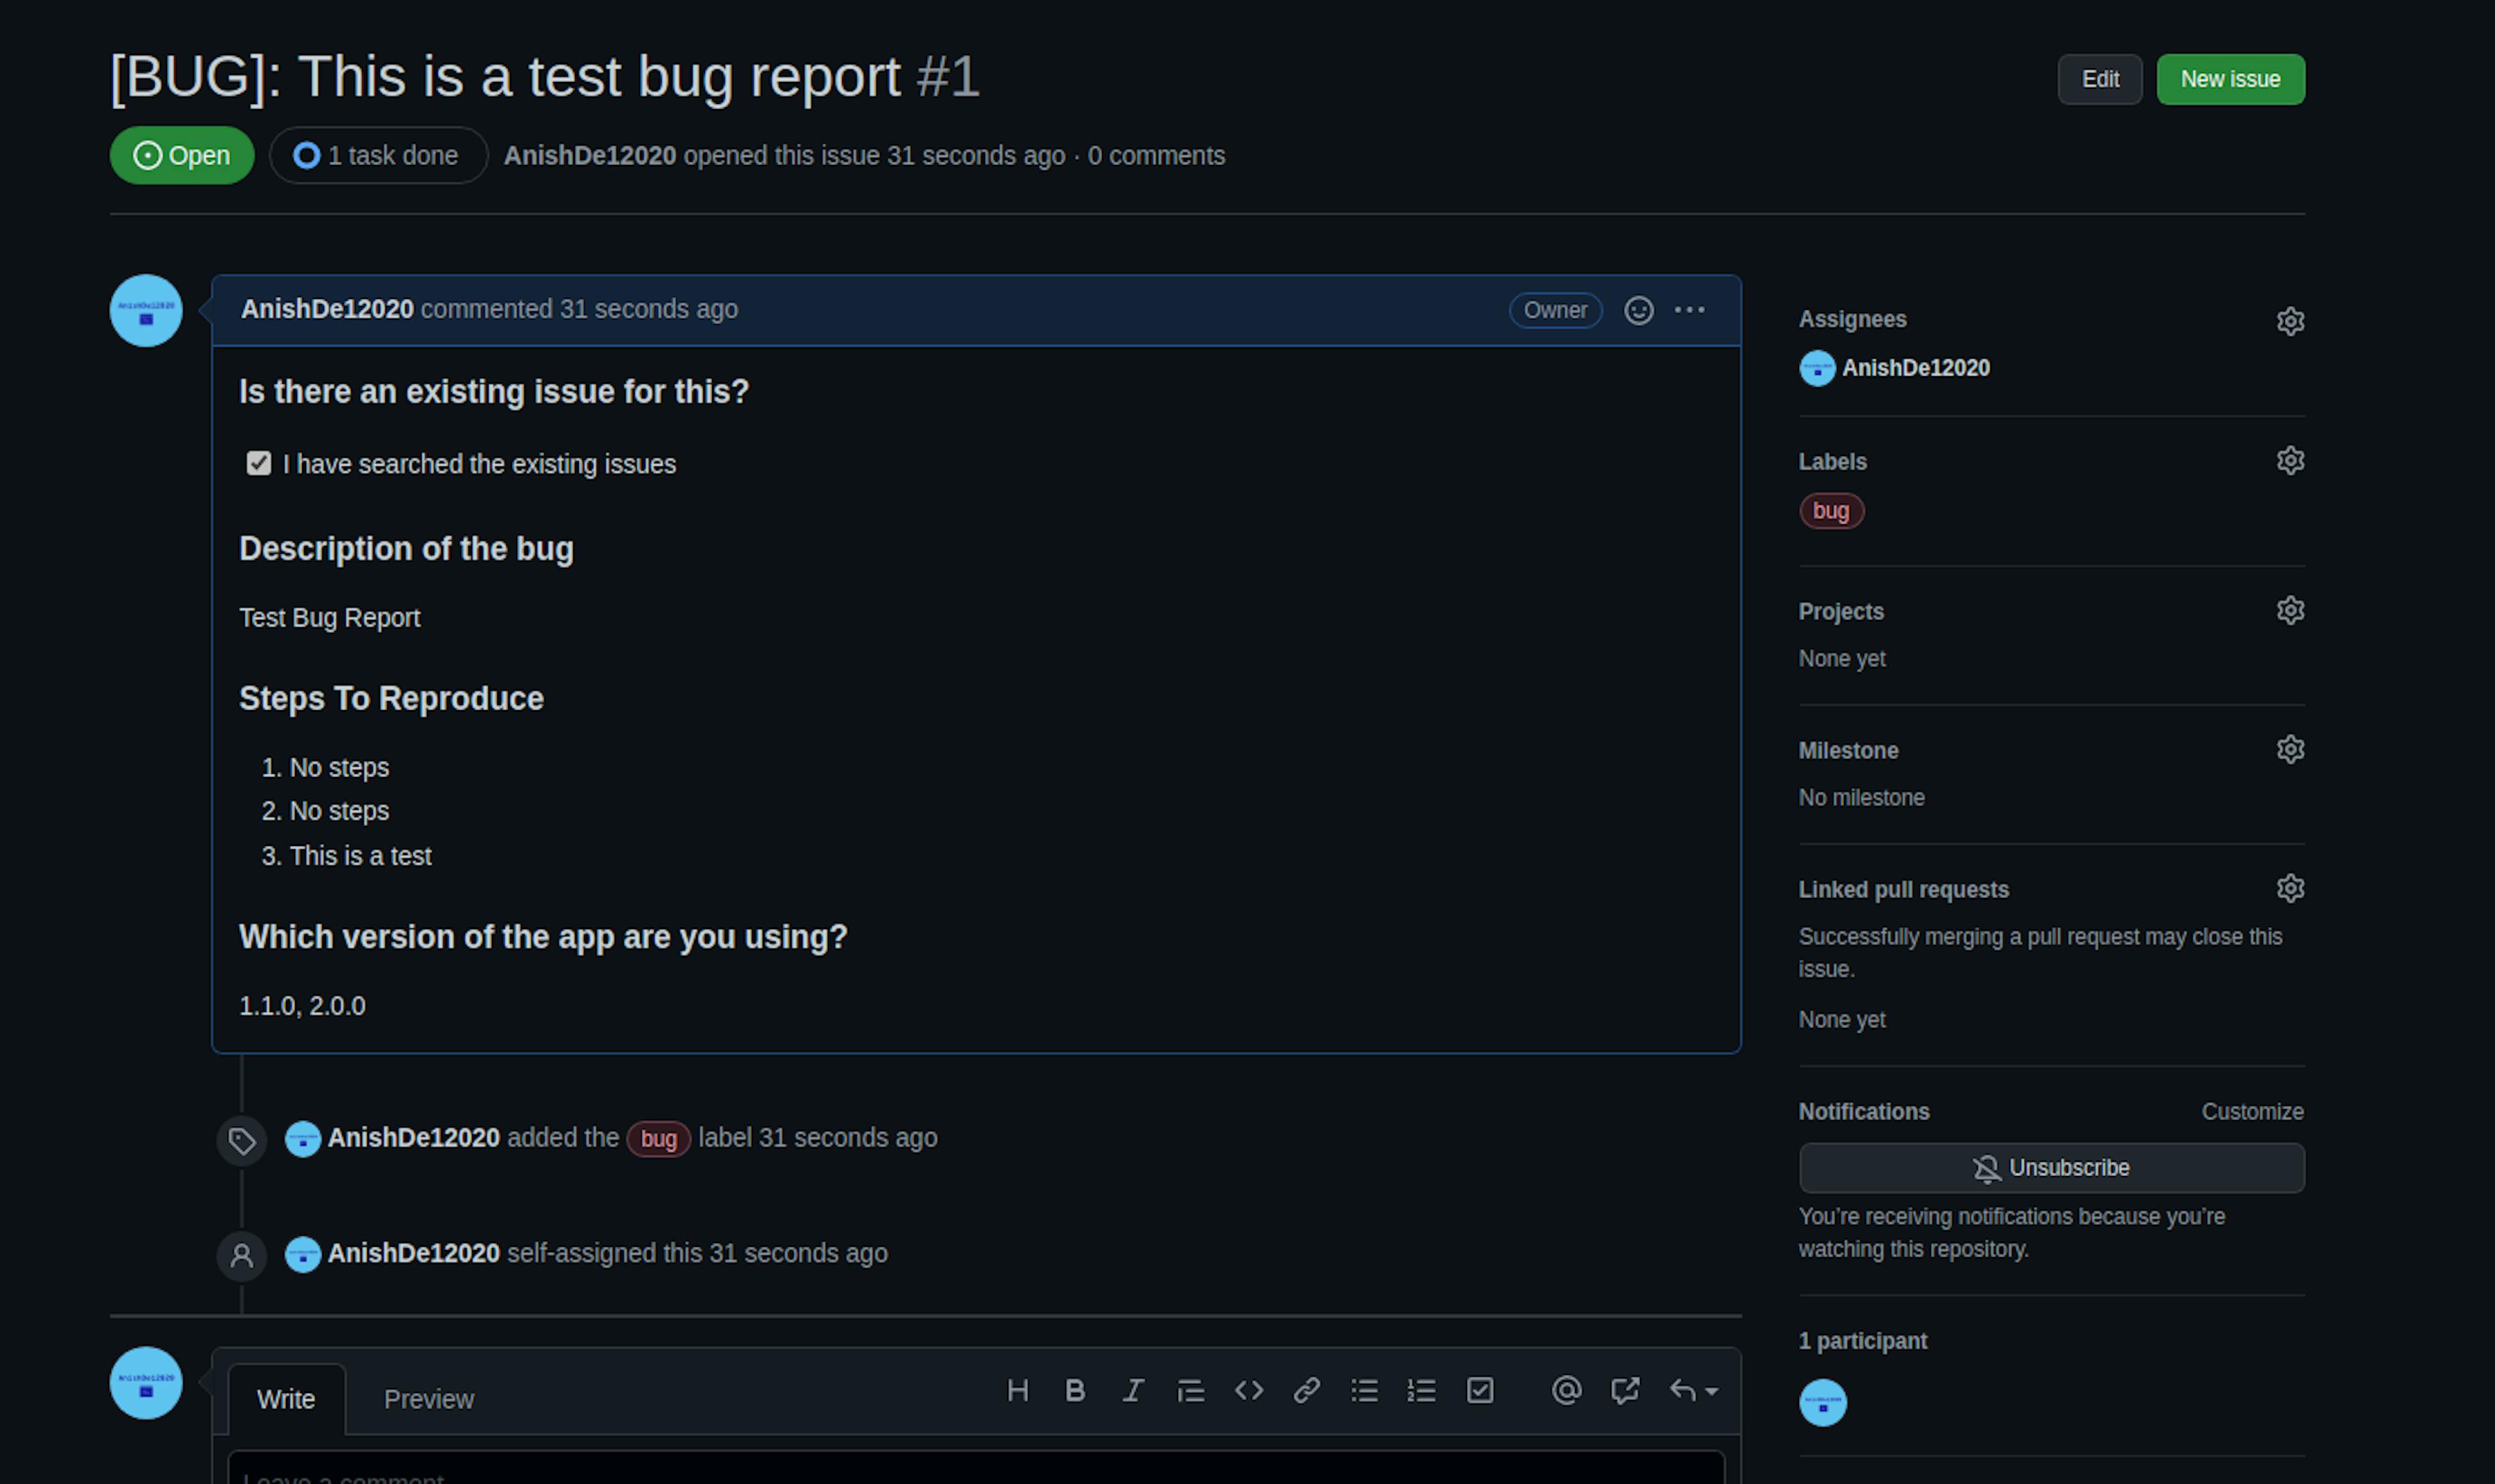 The bug report form